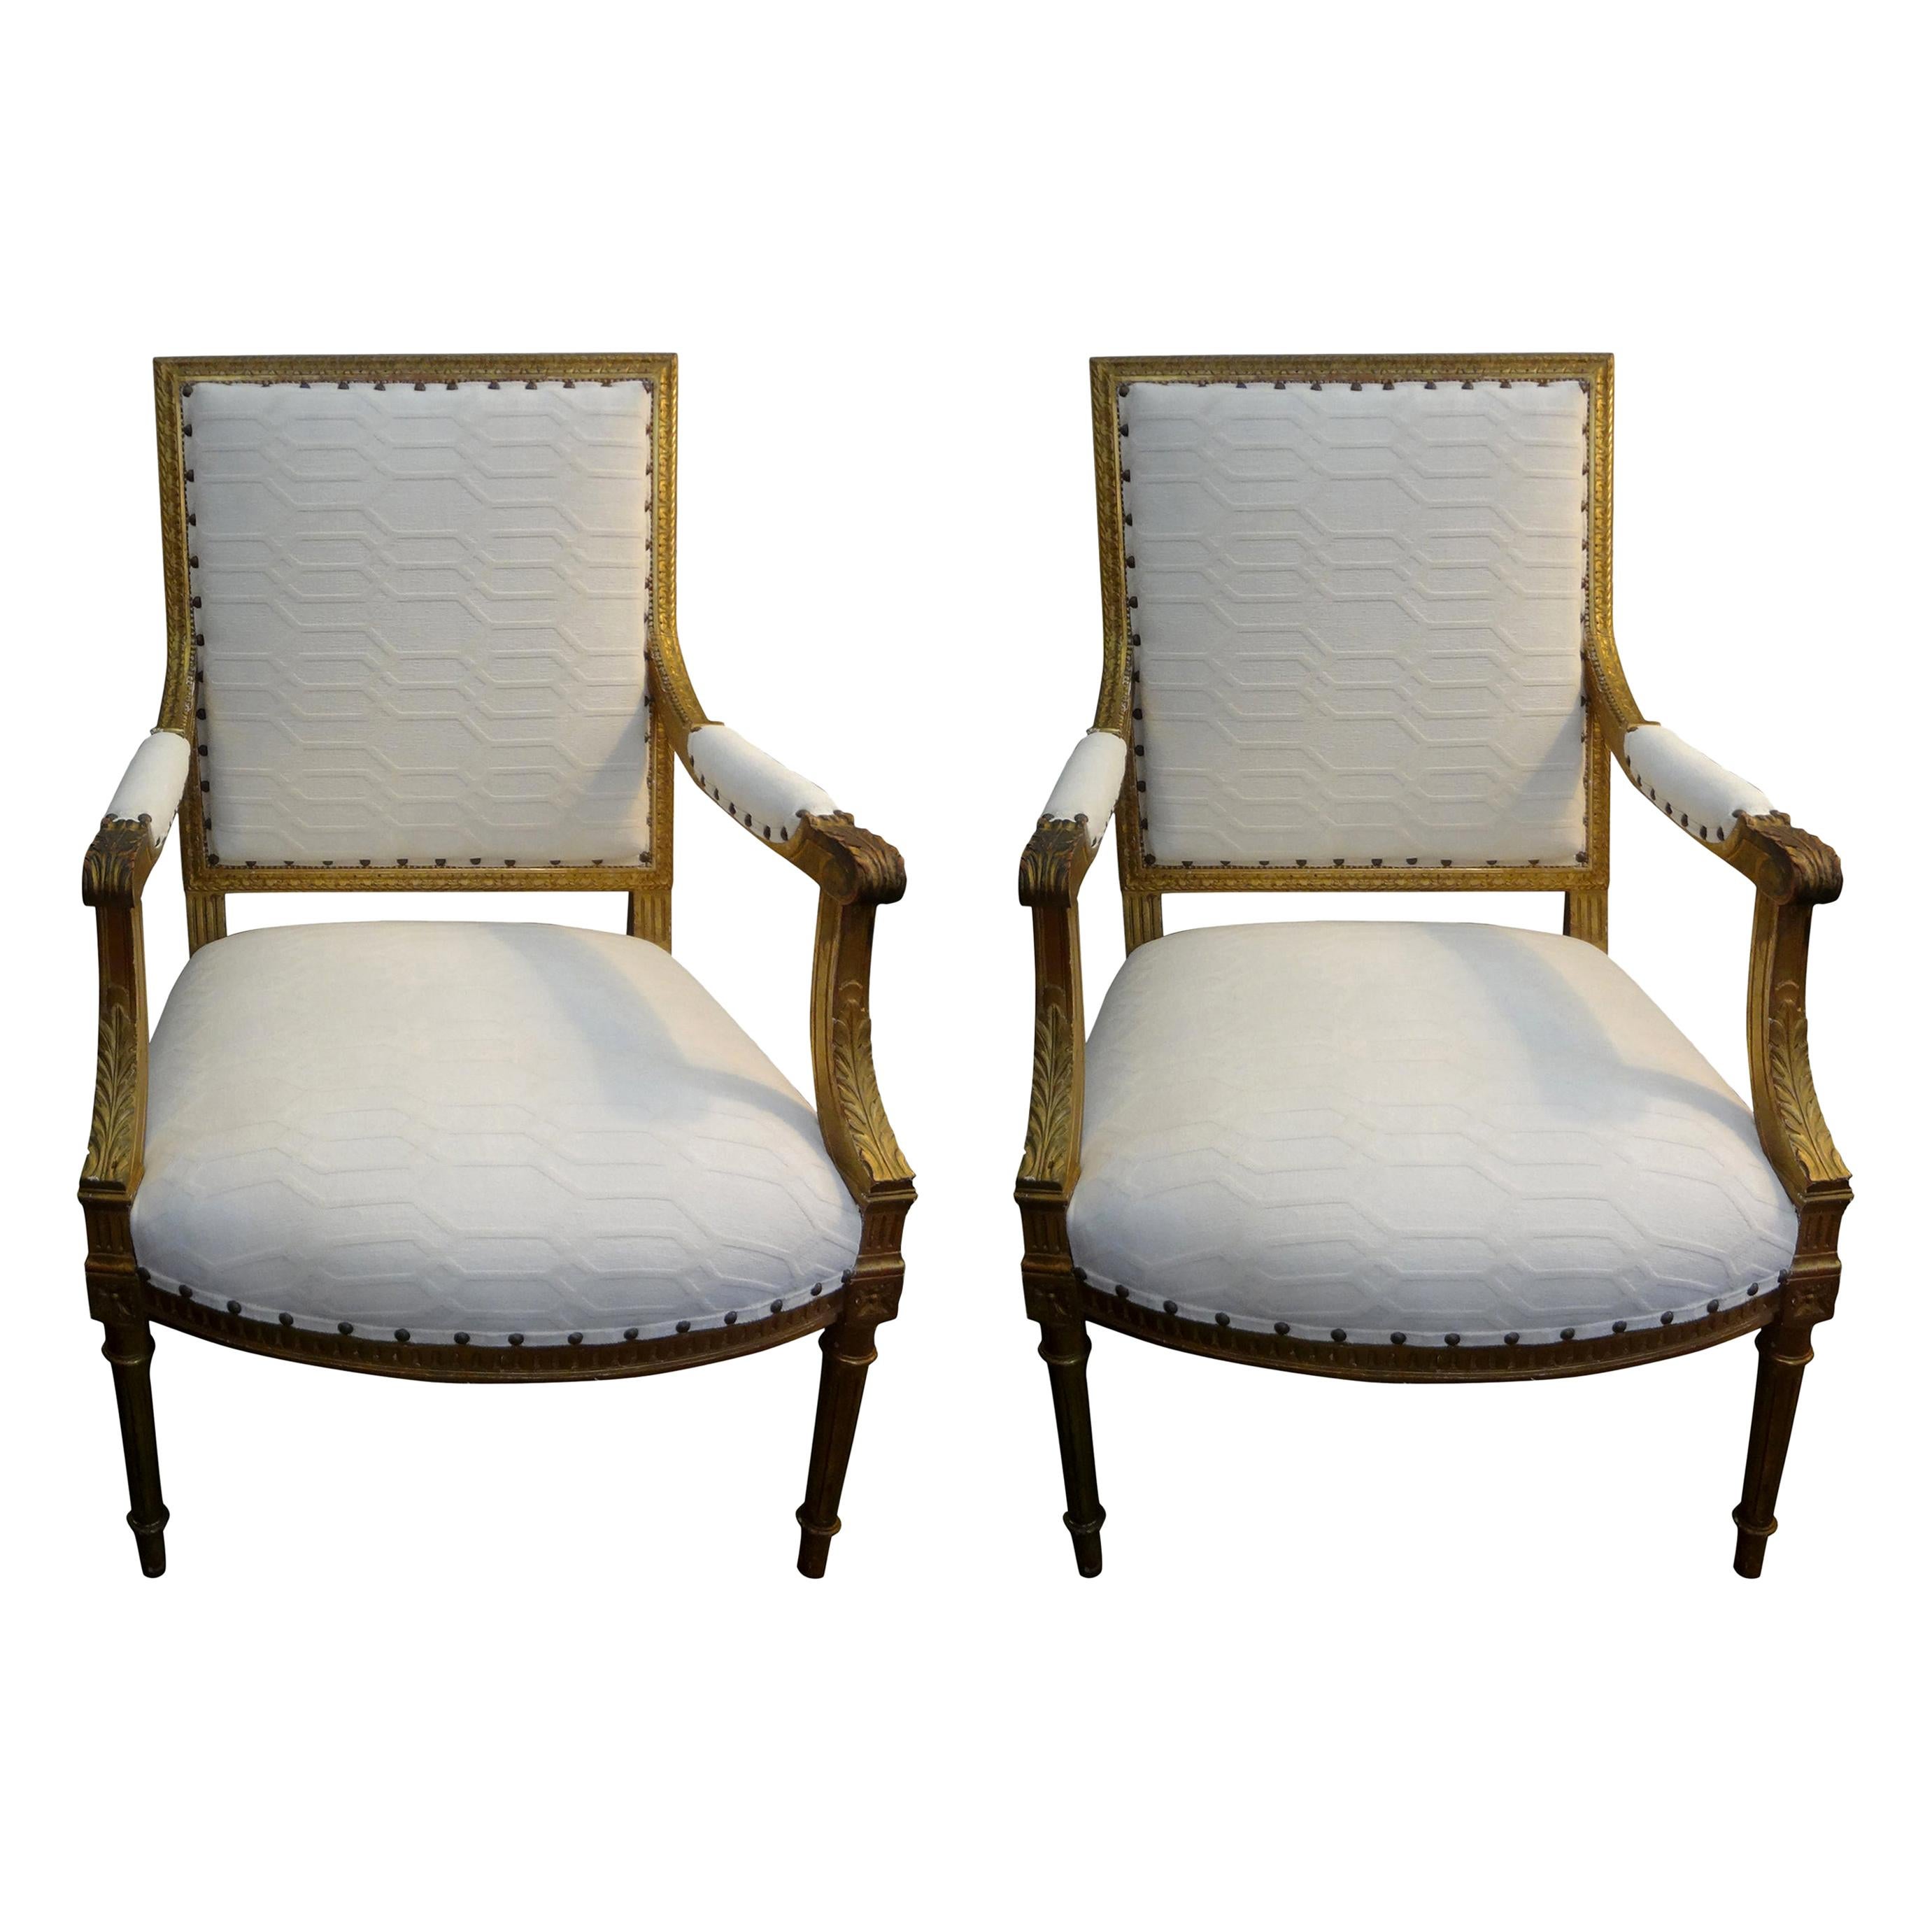 Pair of 19th Century French Louis XVI Style Giltwood Chairs